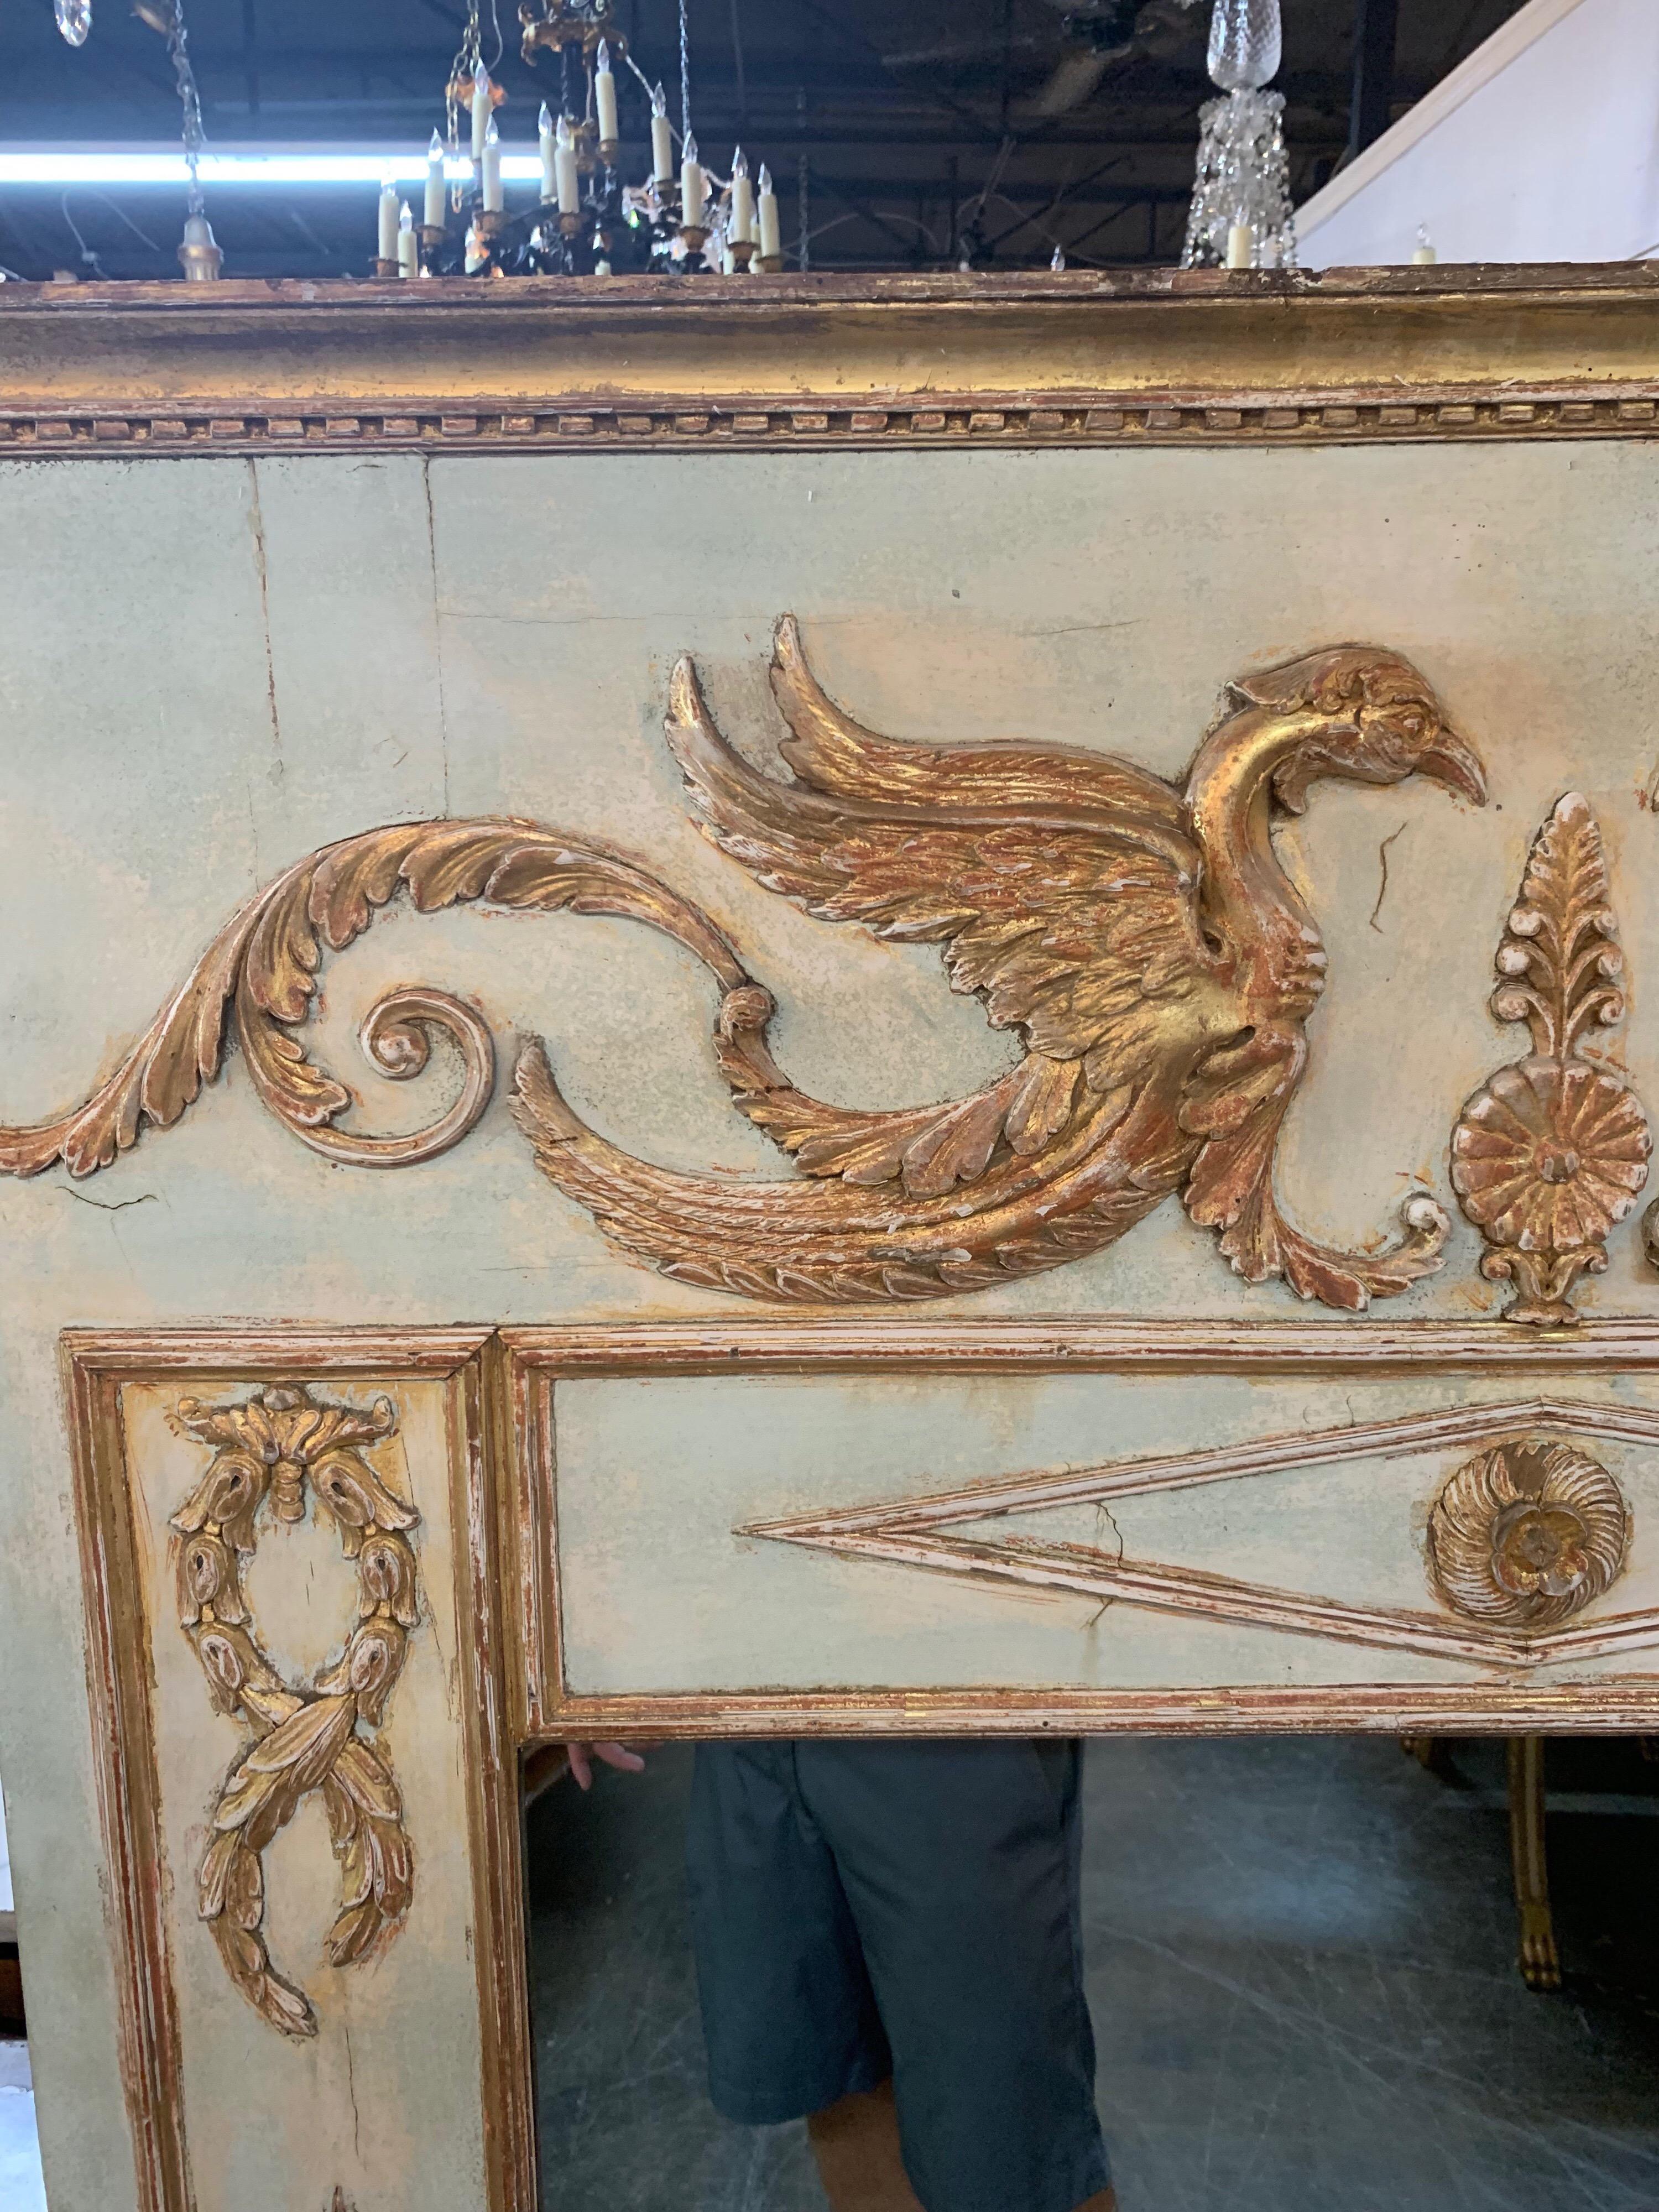 Early 19th century French Empire neoclassical carved and parcel gilt trumeau mirror.
Very interested carving of 2 dragons and other leaves, scrolls and diamonds. Nice patina on the piece as well. Very impressive!